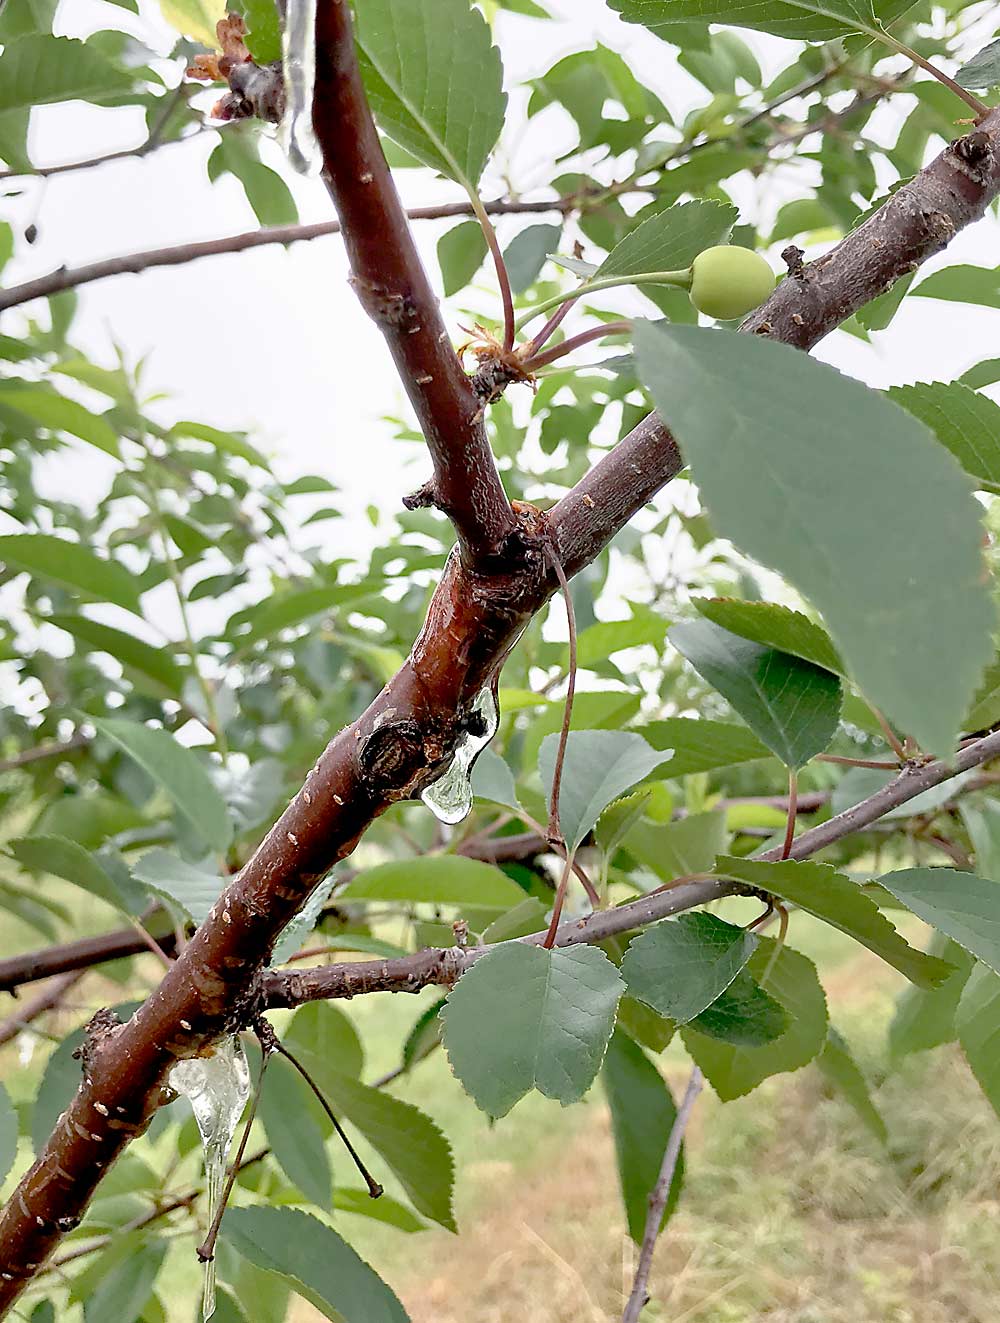 A tart cherry tree at the Northwest Michigan Horticulture Research Center in late July 2019. The clear sap hanging down is from gummosis, likely the result of high rates of ethephon. Gummosis is one of the potential drawbacks of applying high rates of the plant growth regulator. (Courtesy Nikki Rothwell/Michigan State University)